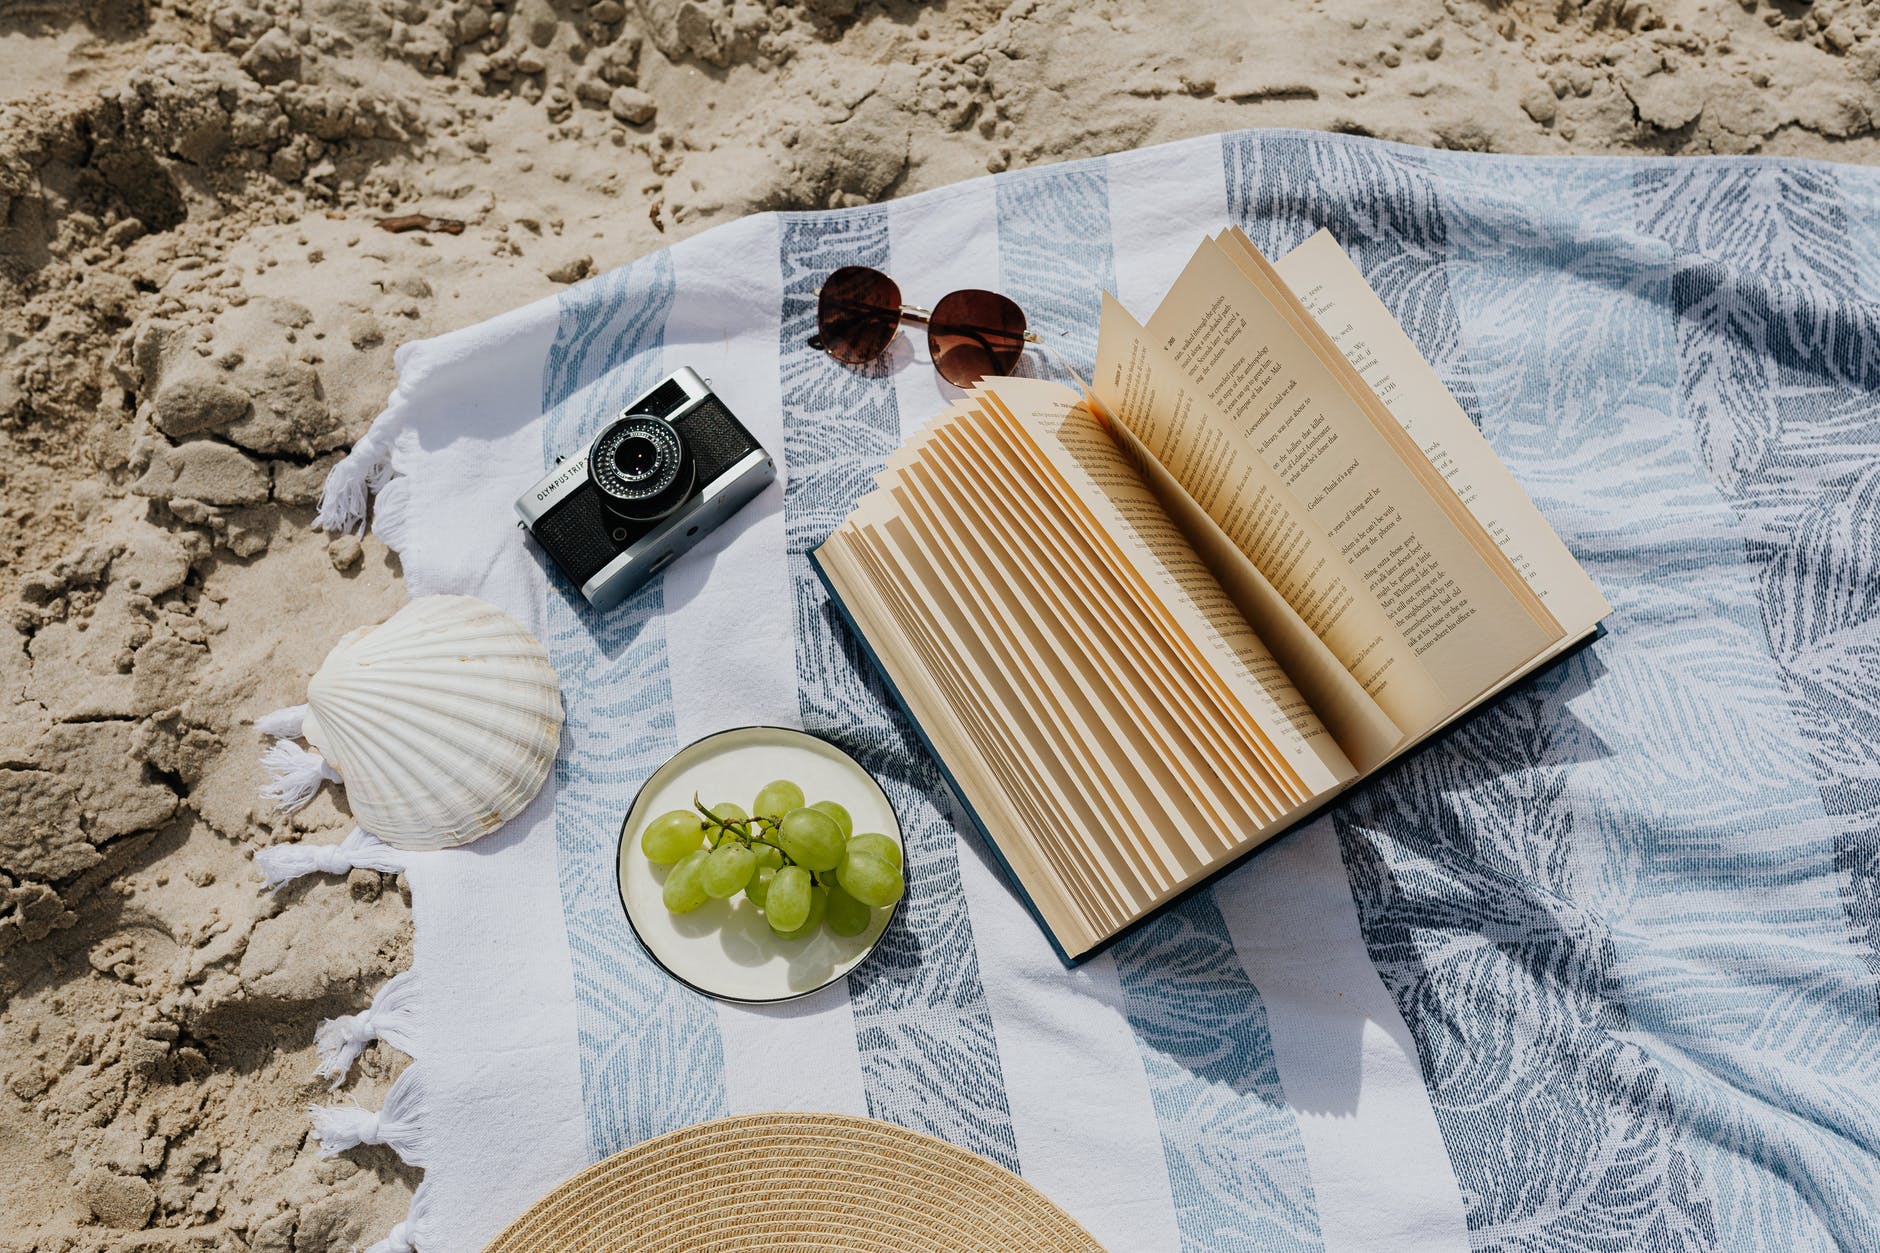 book and camera on a beach towel